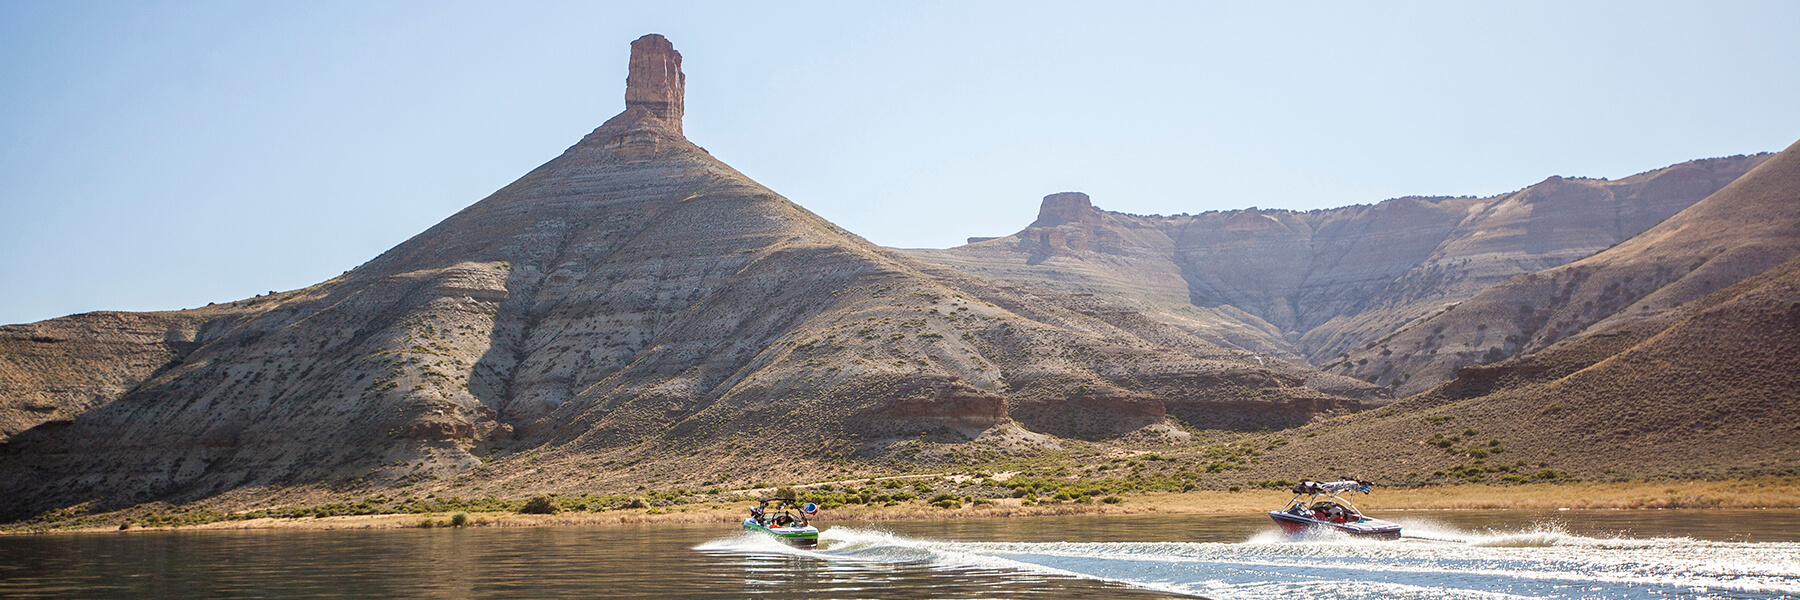 Boating in Flaming Gorge National Recreation Area